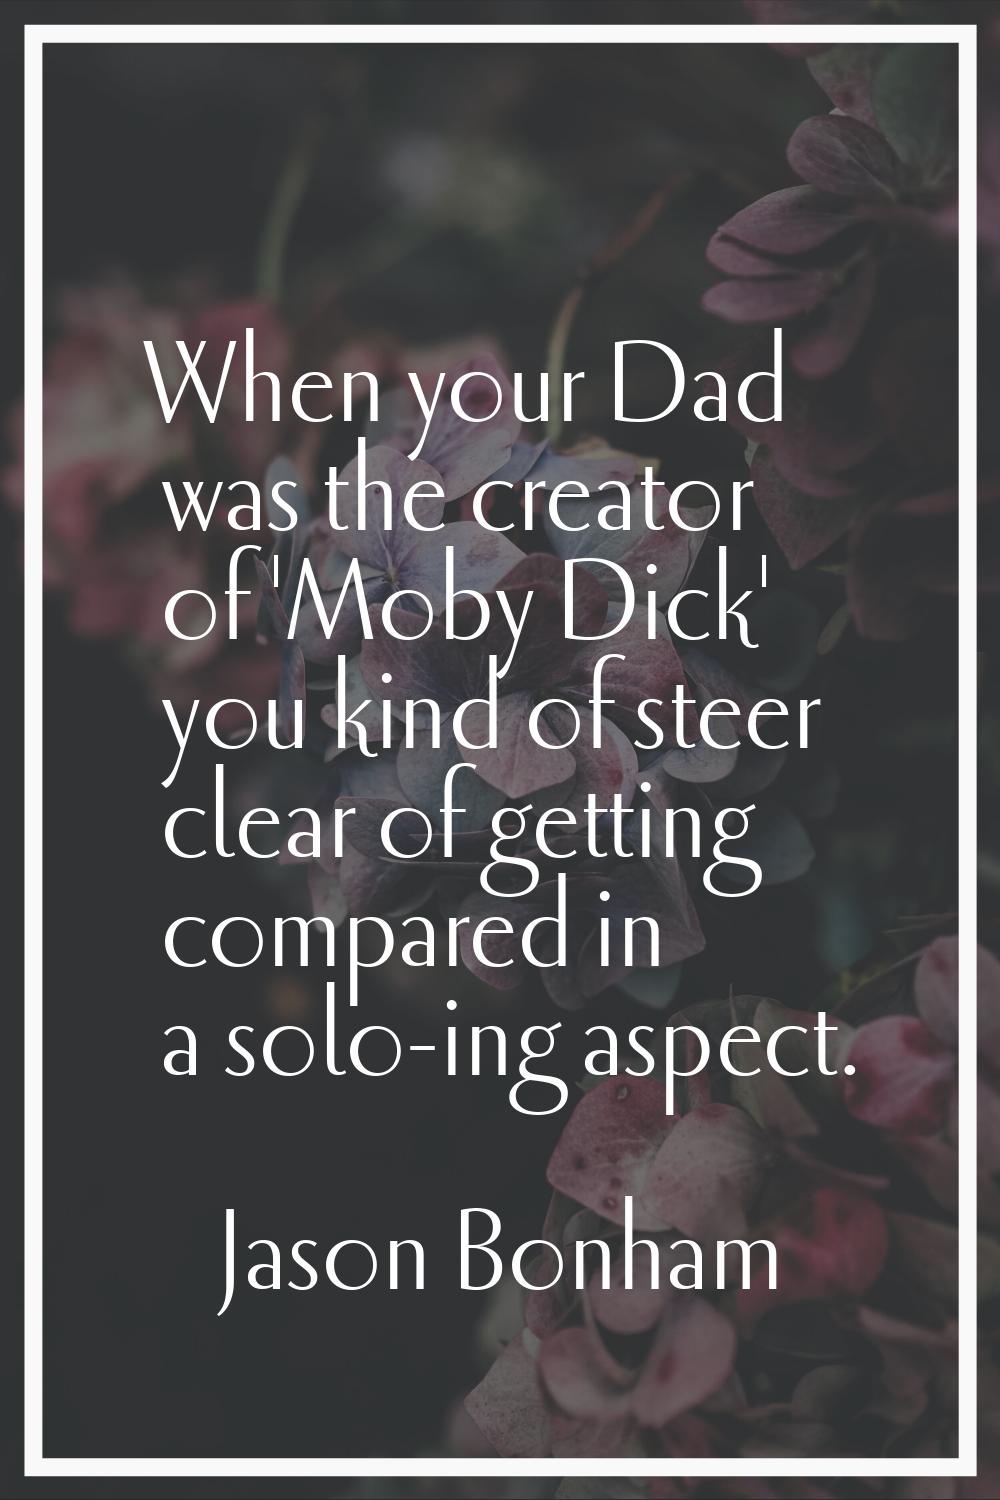 When your Dad was the creator of 'Moby Dick' you kind of steer clear of getting compared in a solo-